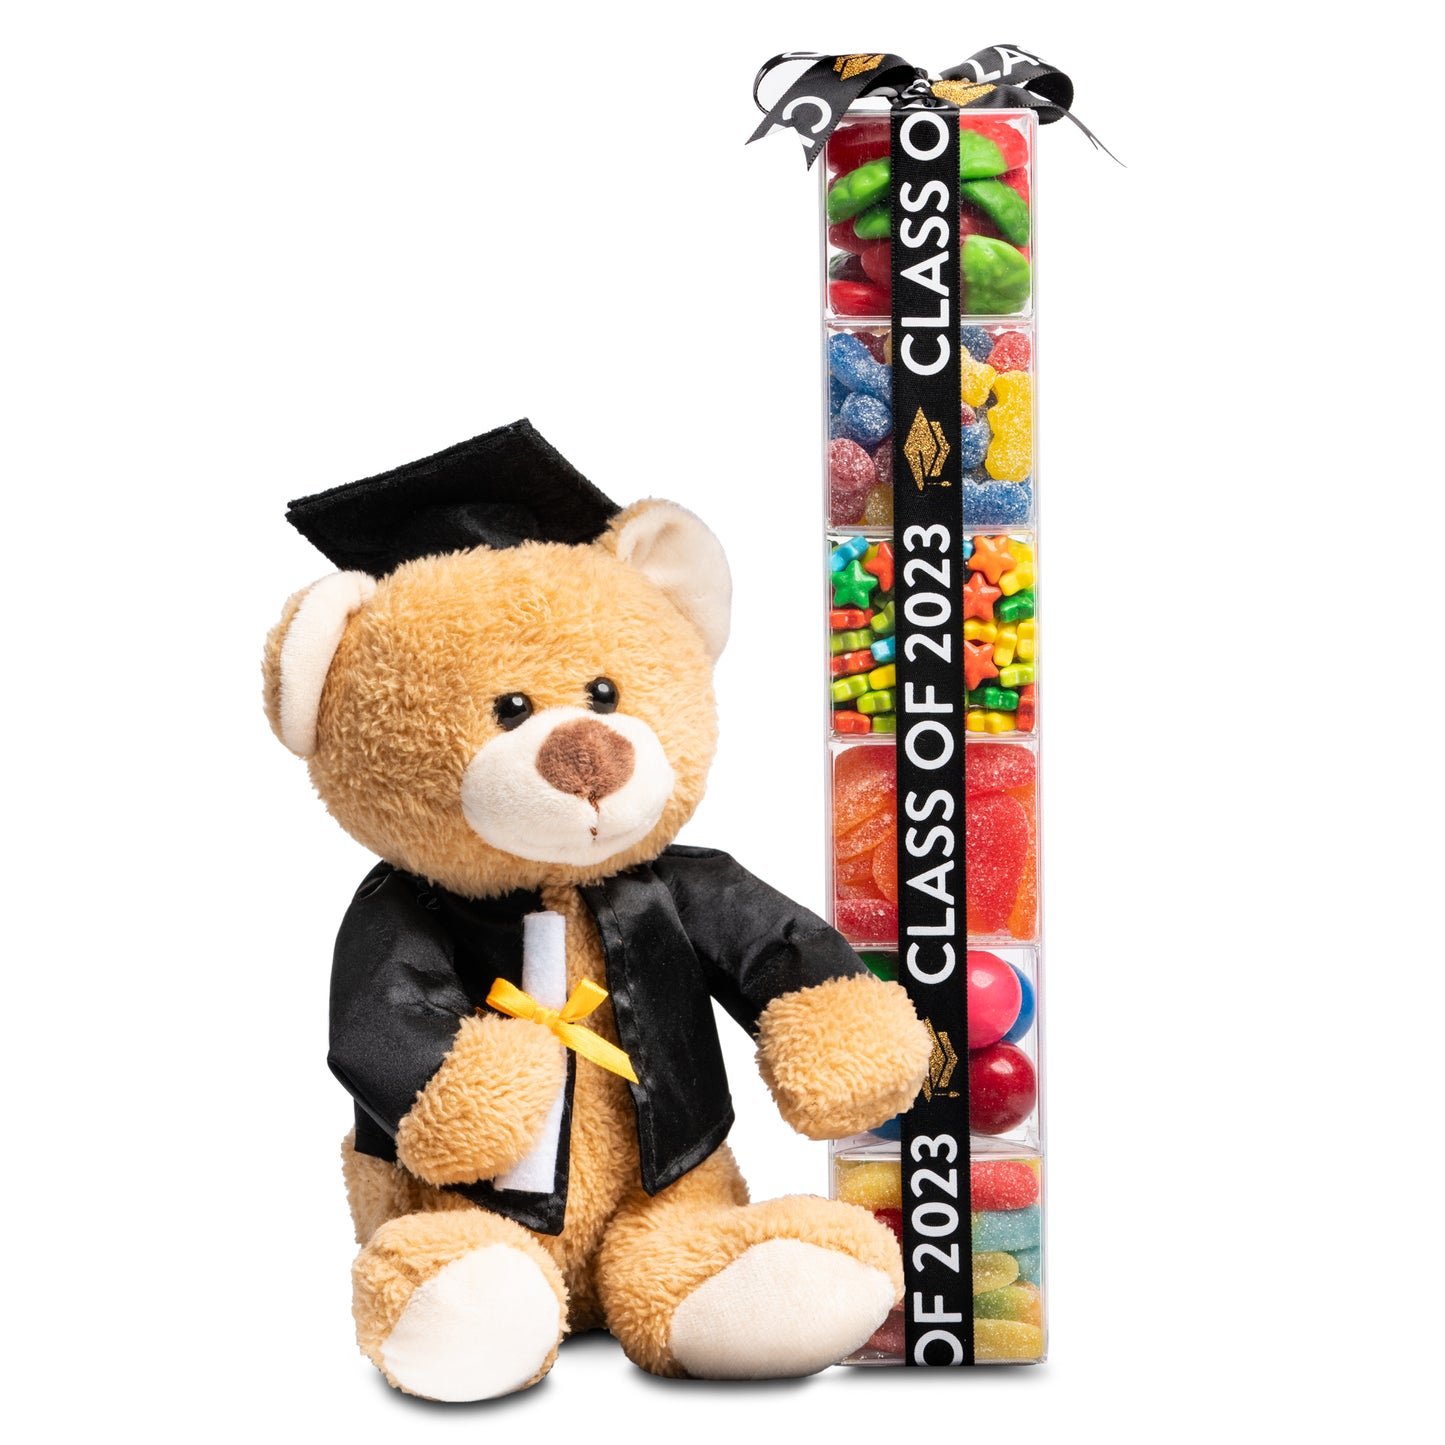 Graduation Stack with Teddy- 6 cubes